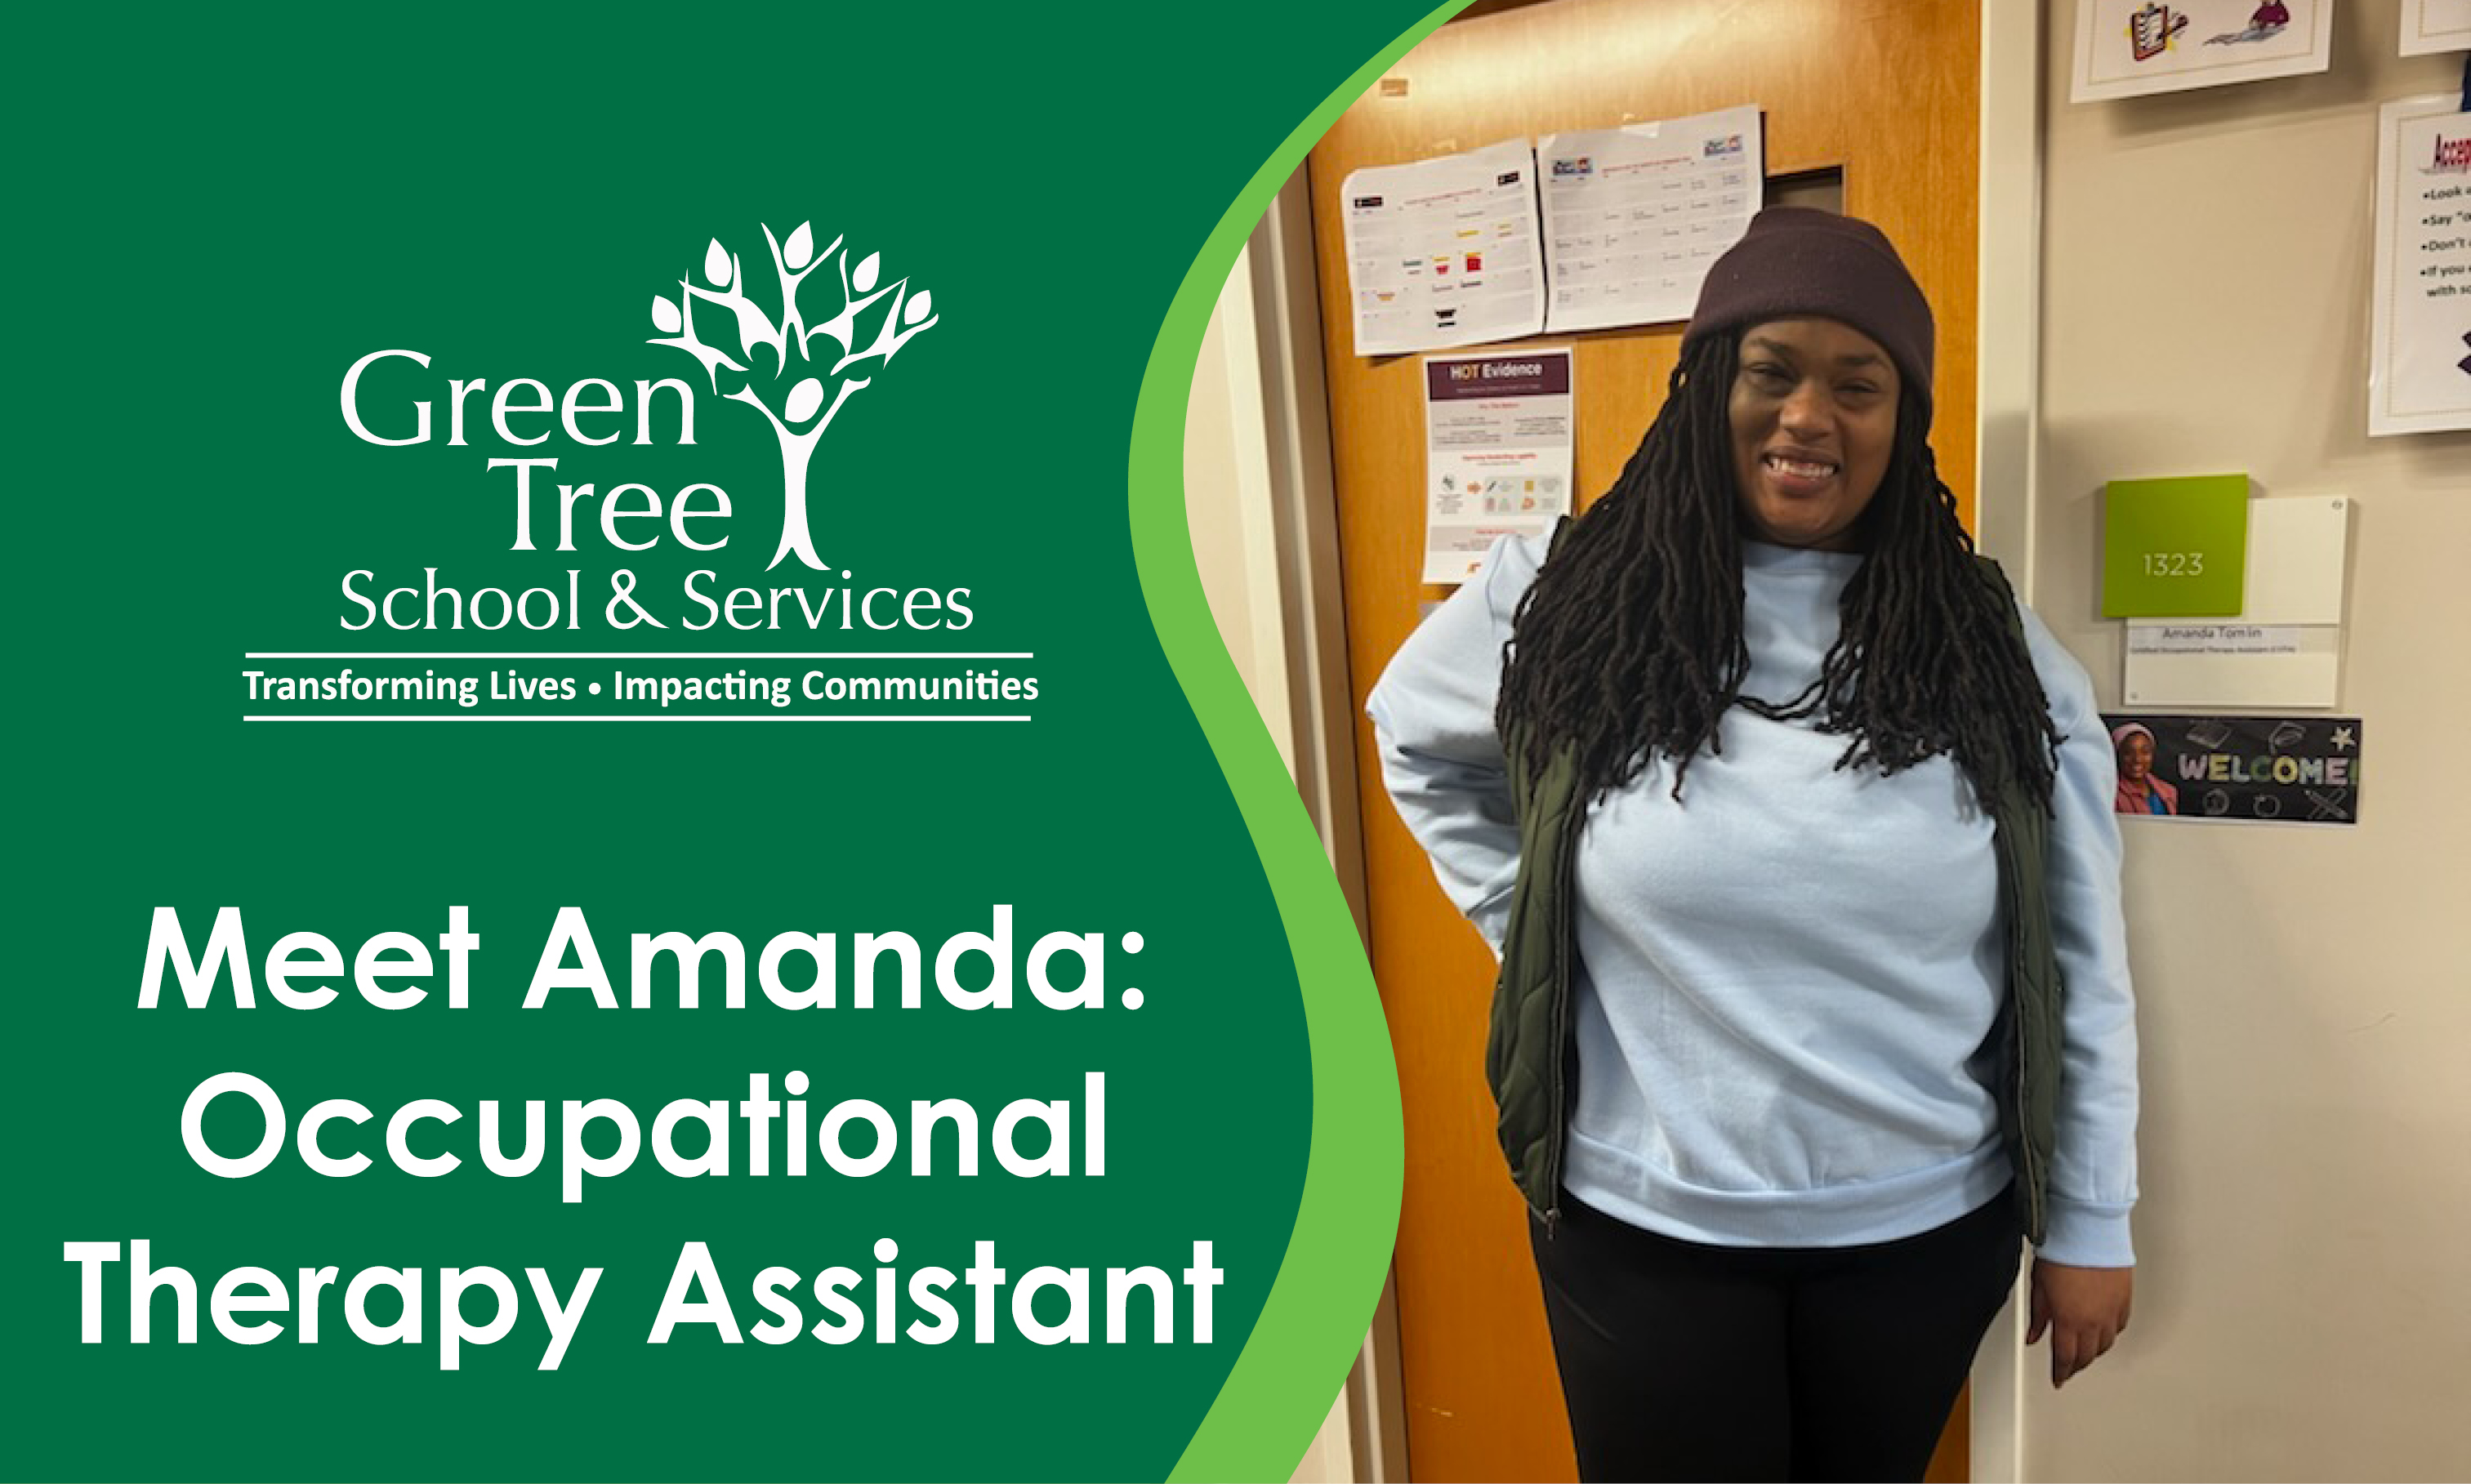 Meet Amanda: Occupational Therapy Assistant